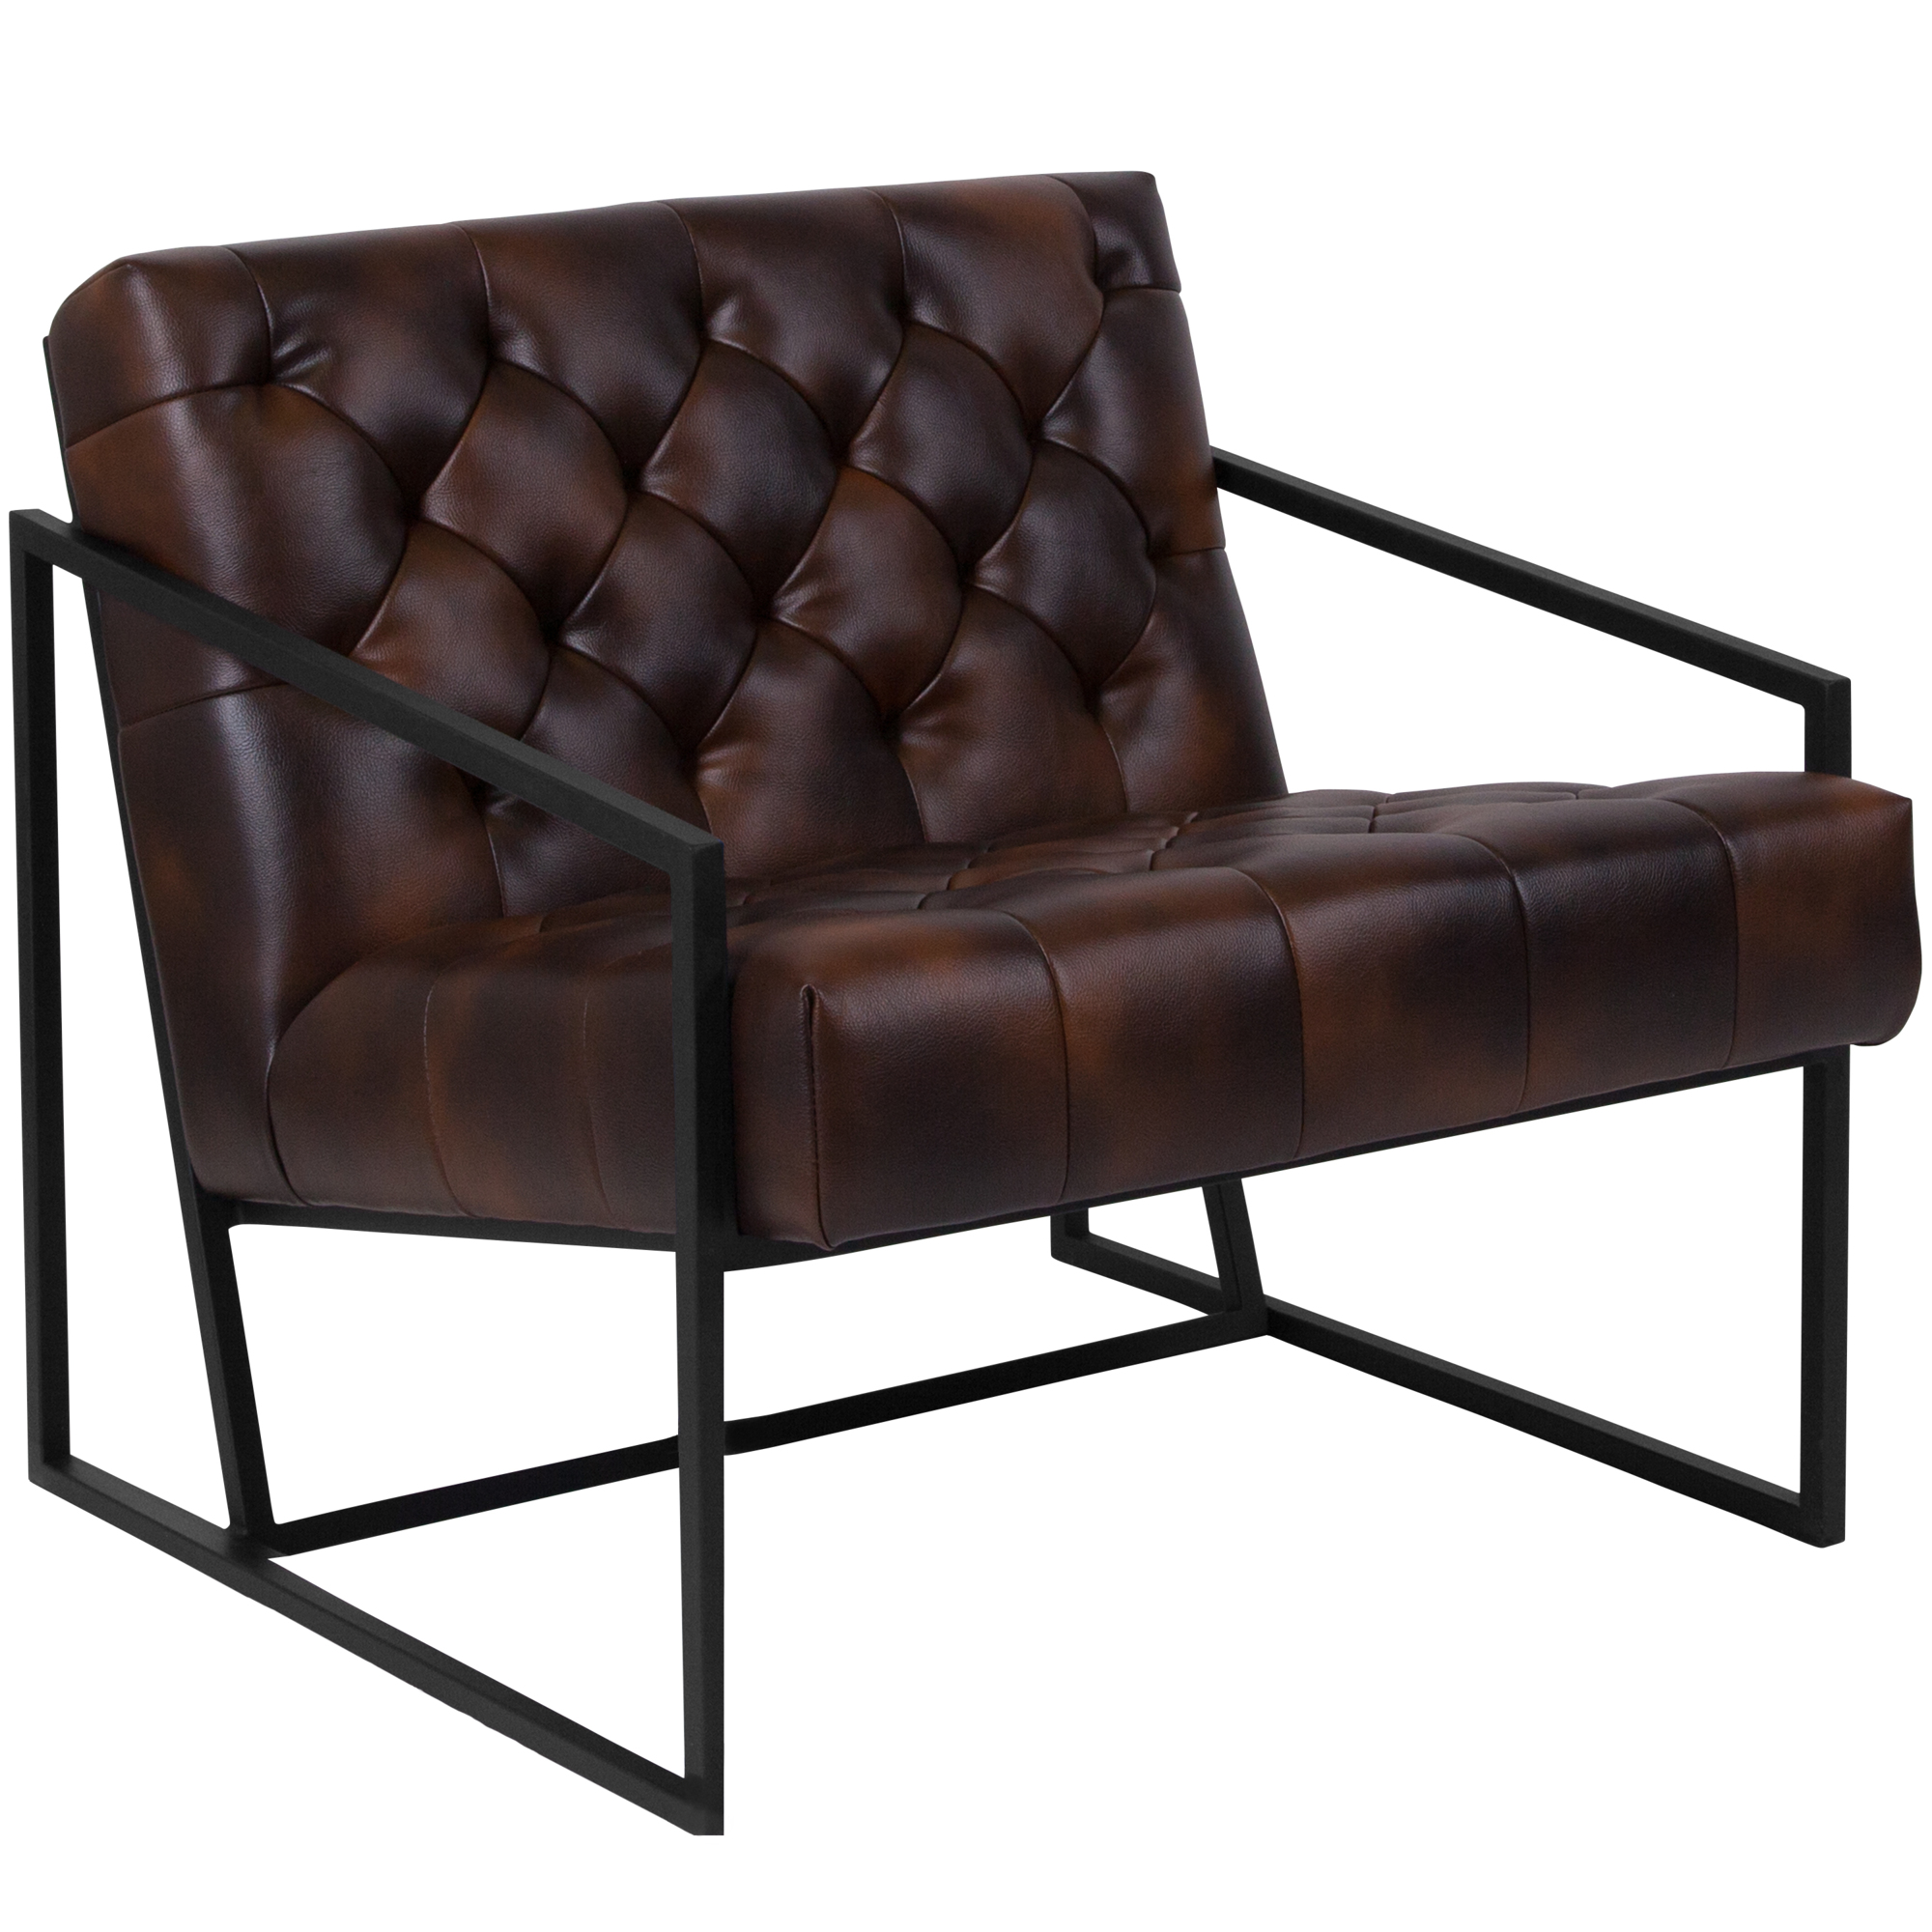 Flash Furniture, Bomber Jacket LeatherSoft Tufted Lounge Chair, Primary Color Brown, Included (qty.) 1, Model ZB8522BJ